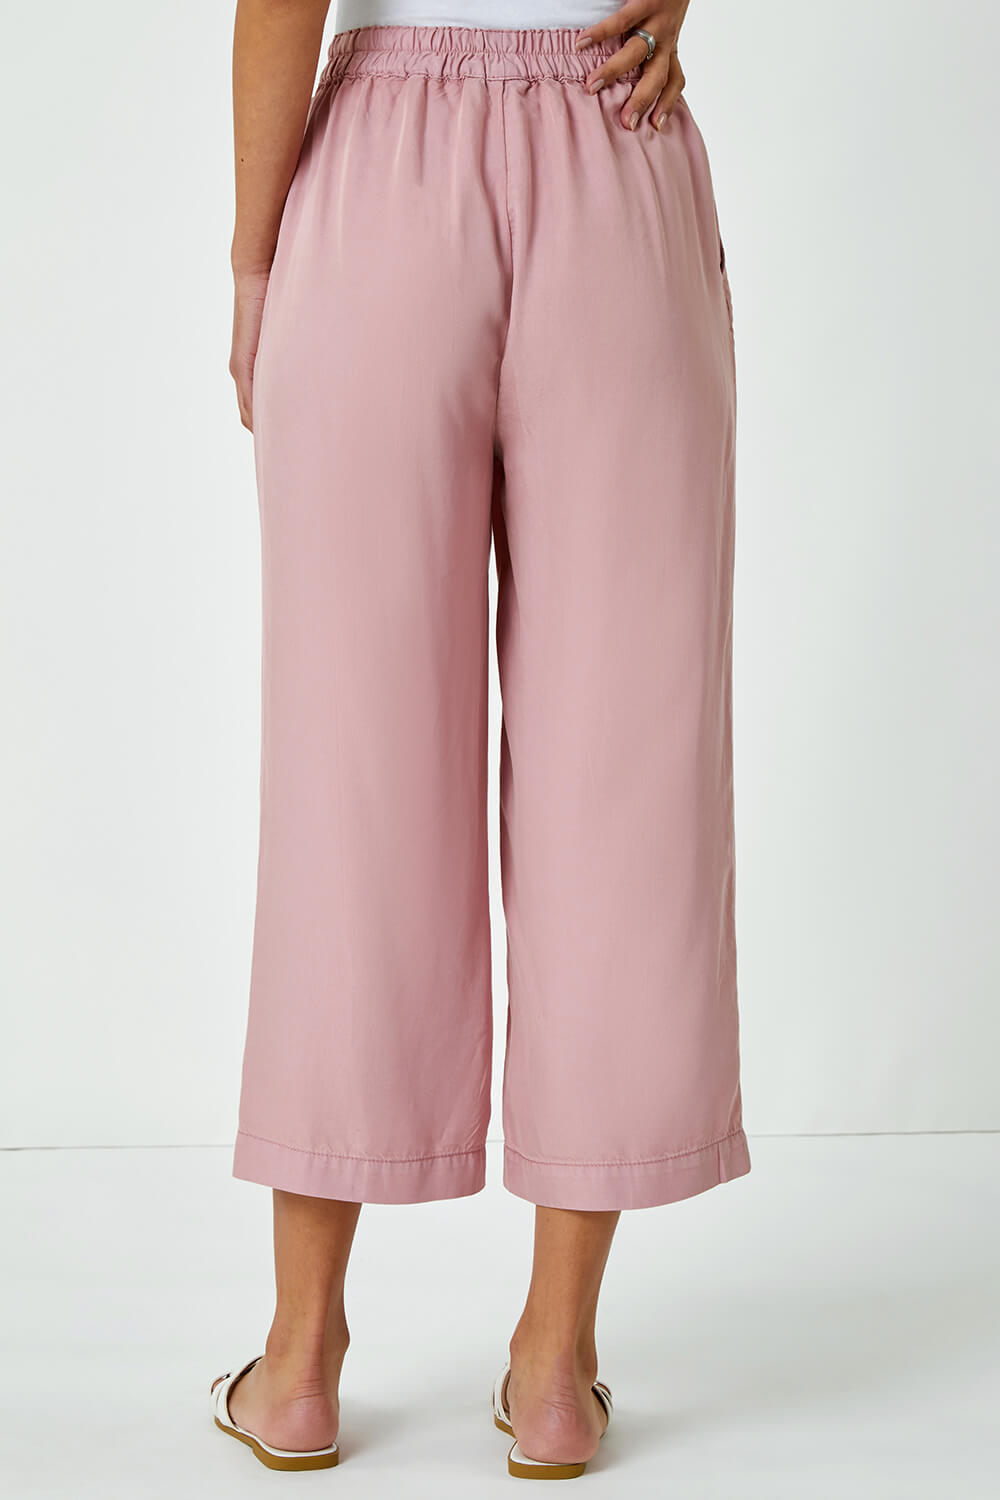 Rose Tie Detail Stretch Waist Culottes, Image 4 of 5